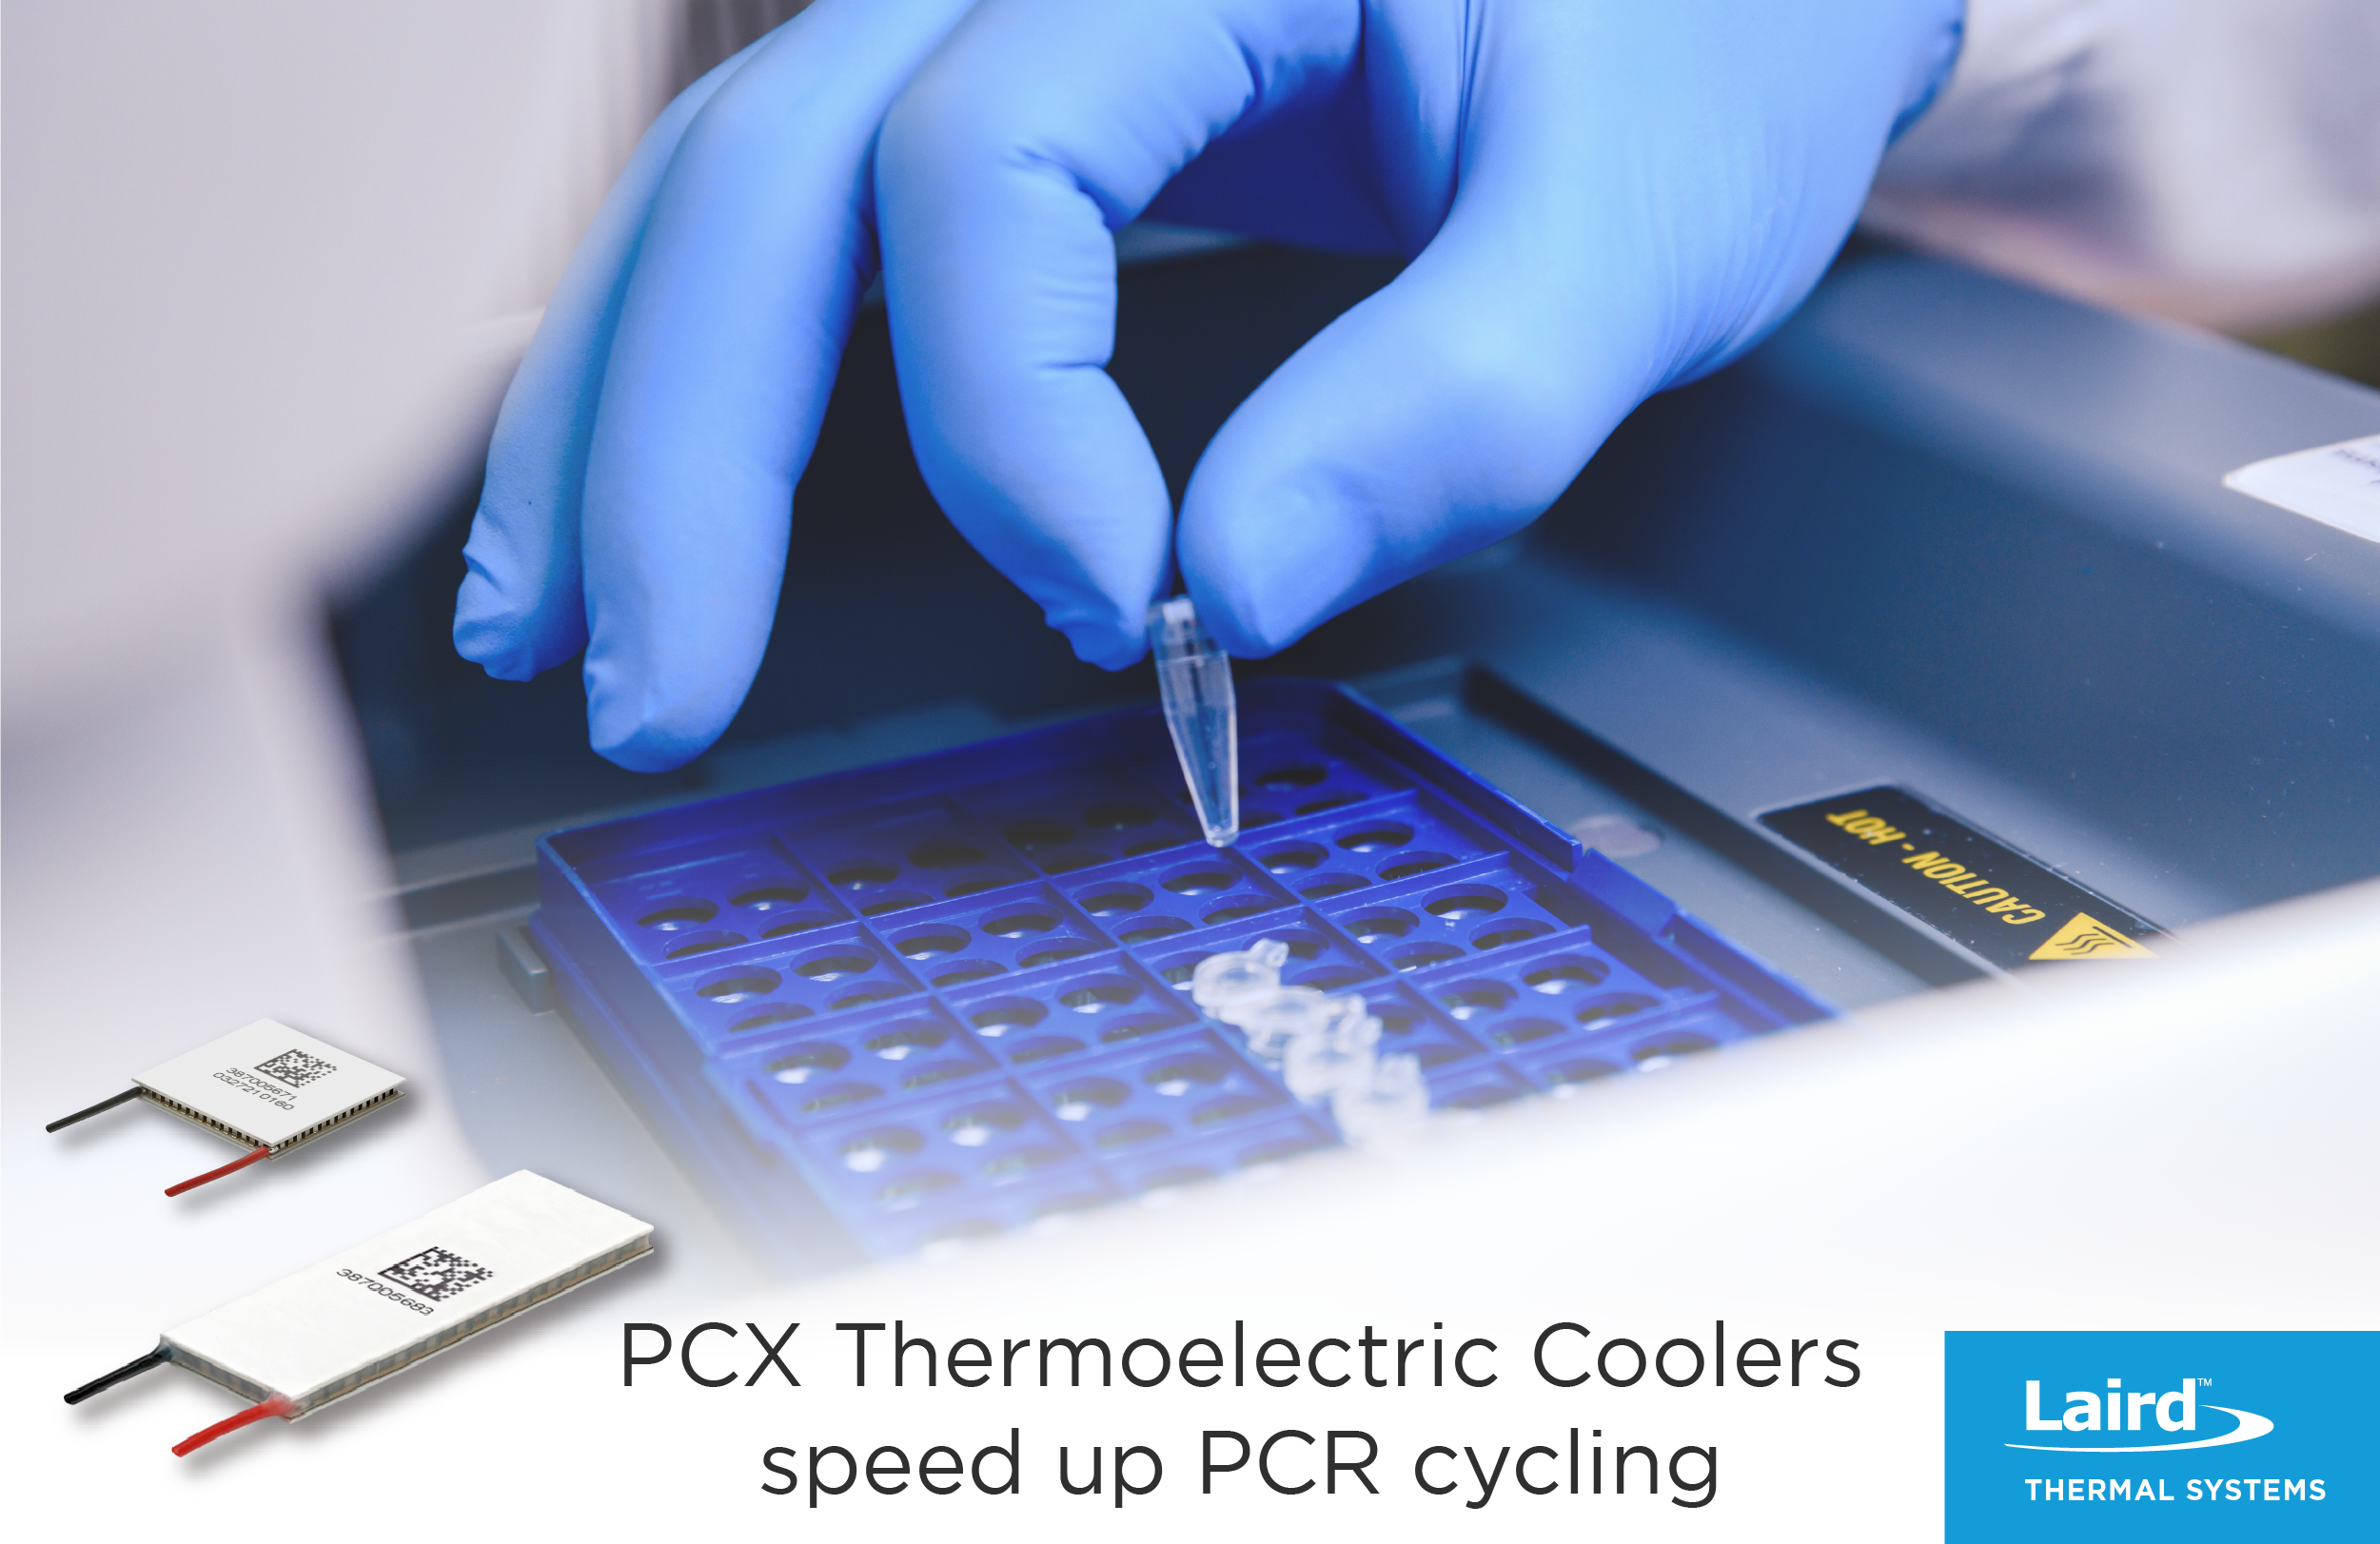 pcx-thermoelectric-coolers-speed-up-PCR-cycling